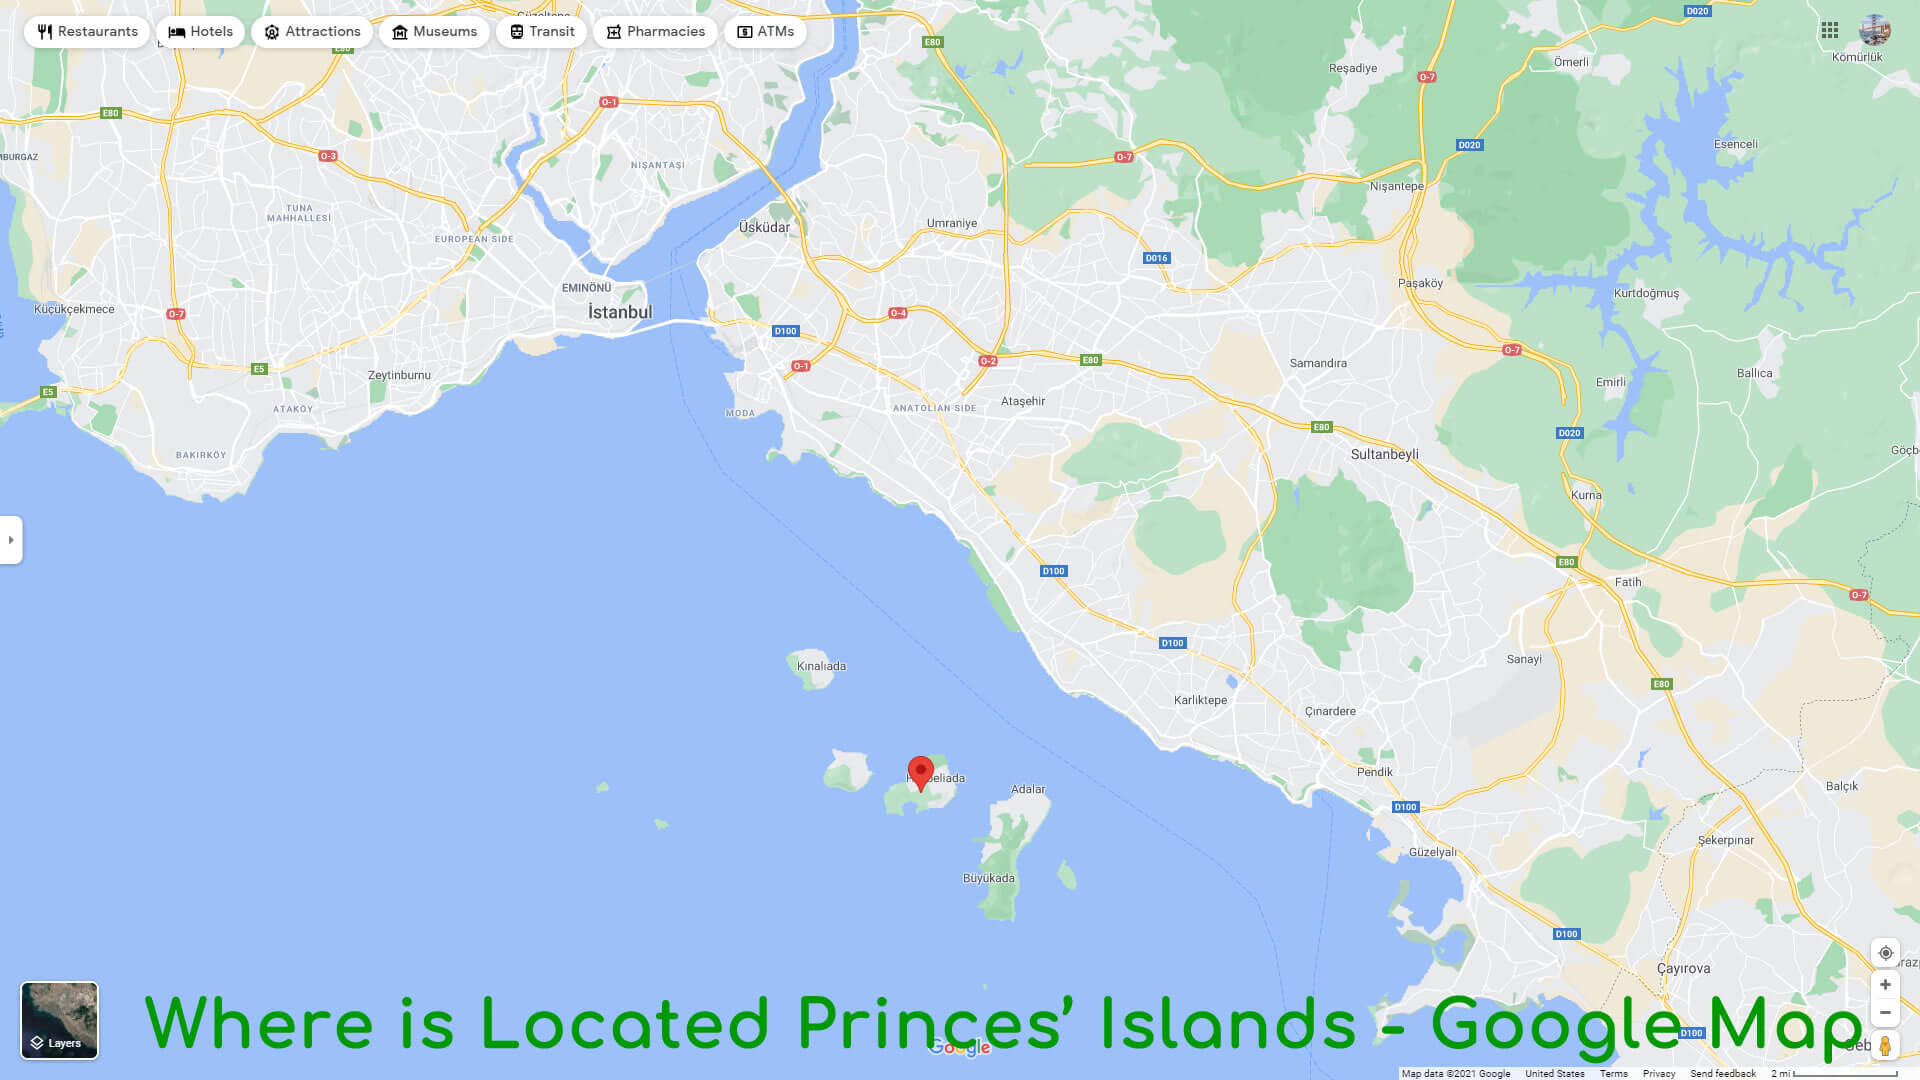 Where is Located Princes Islands - Google Map